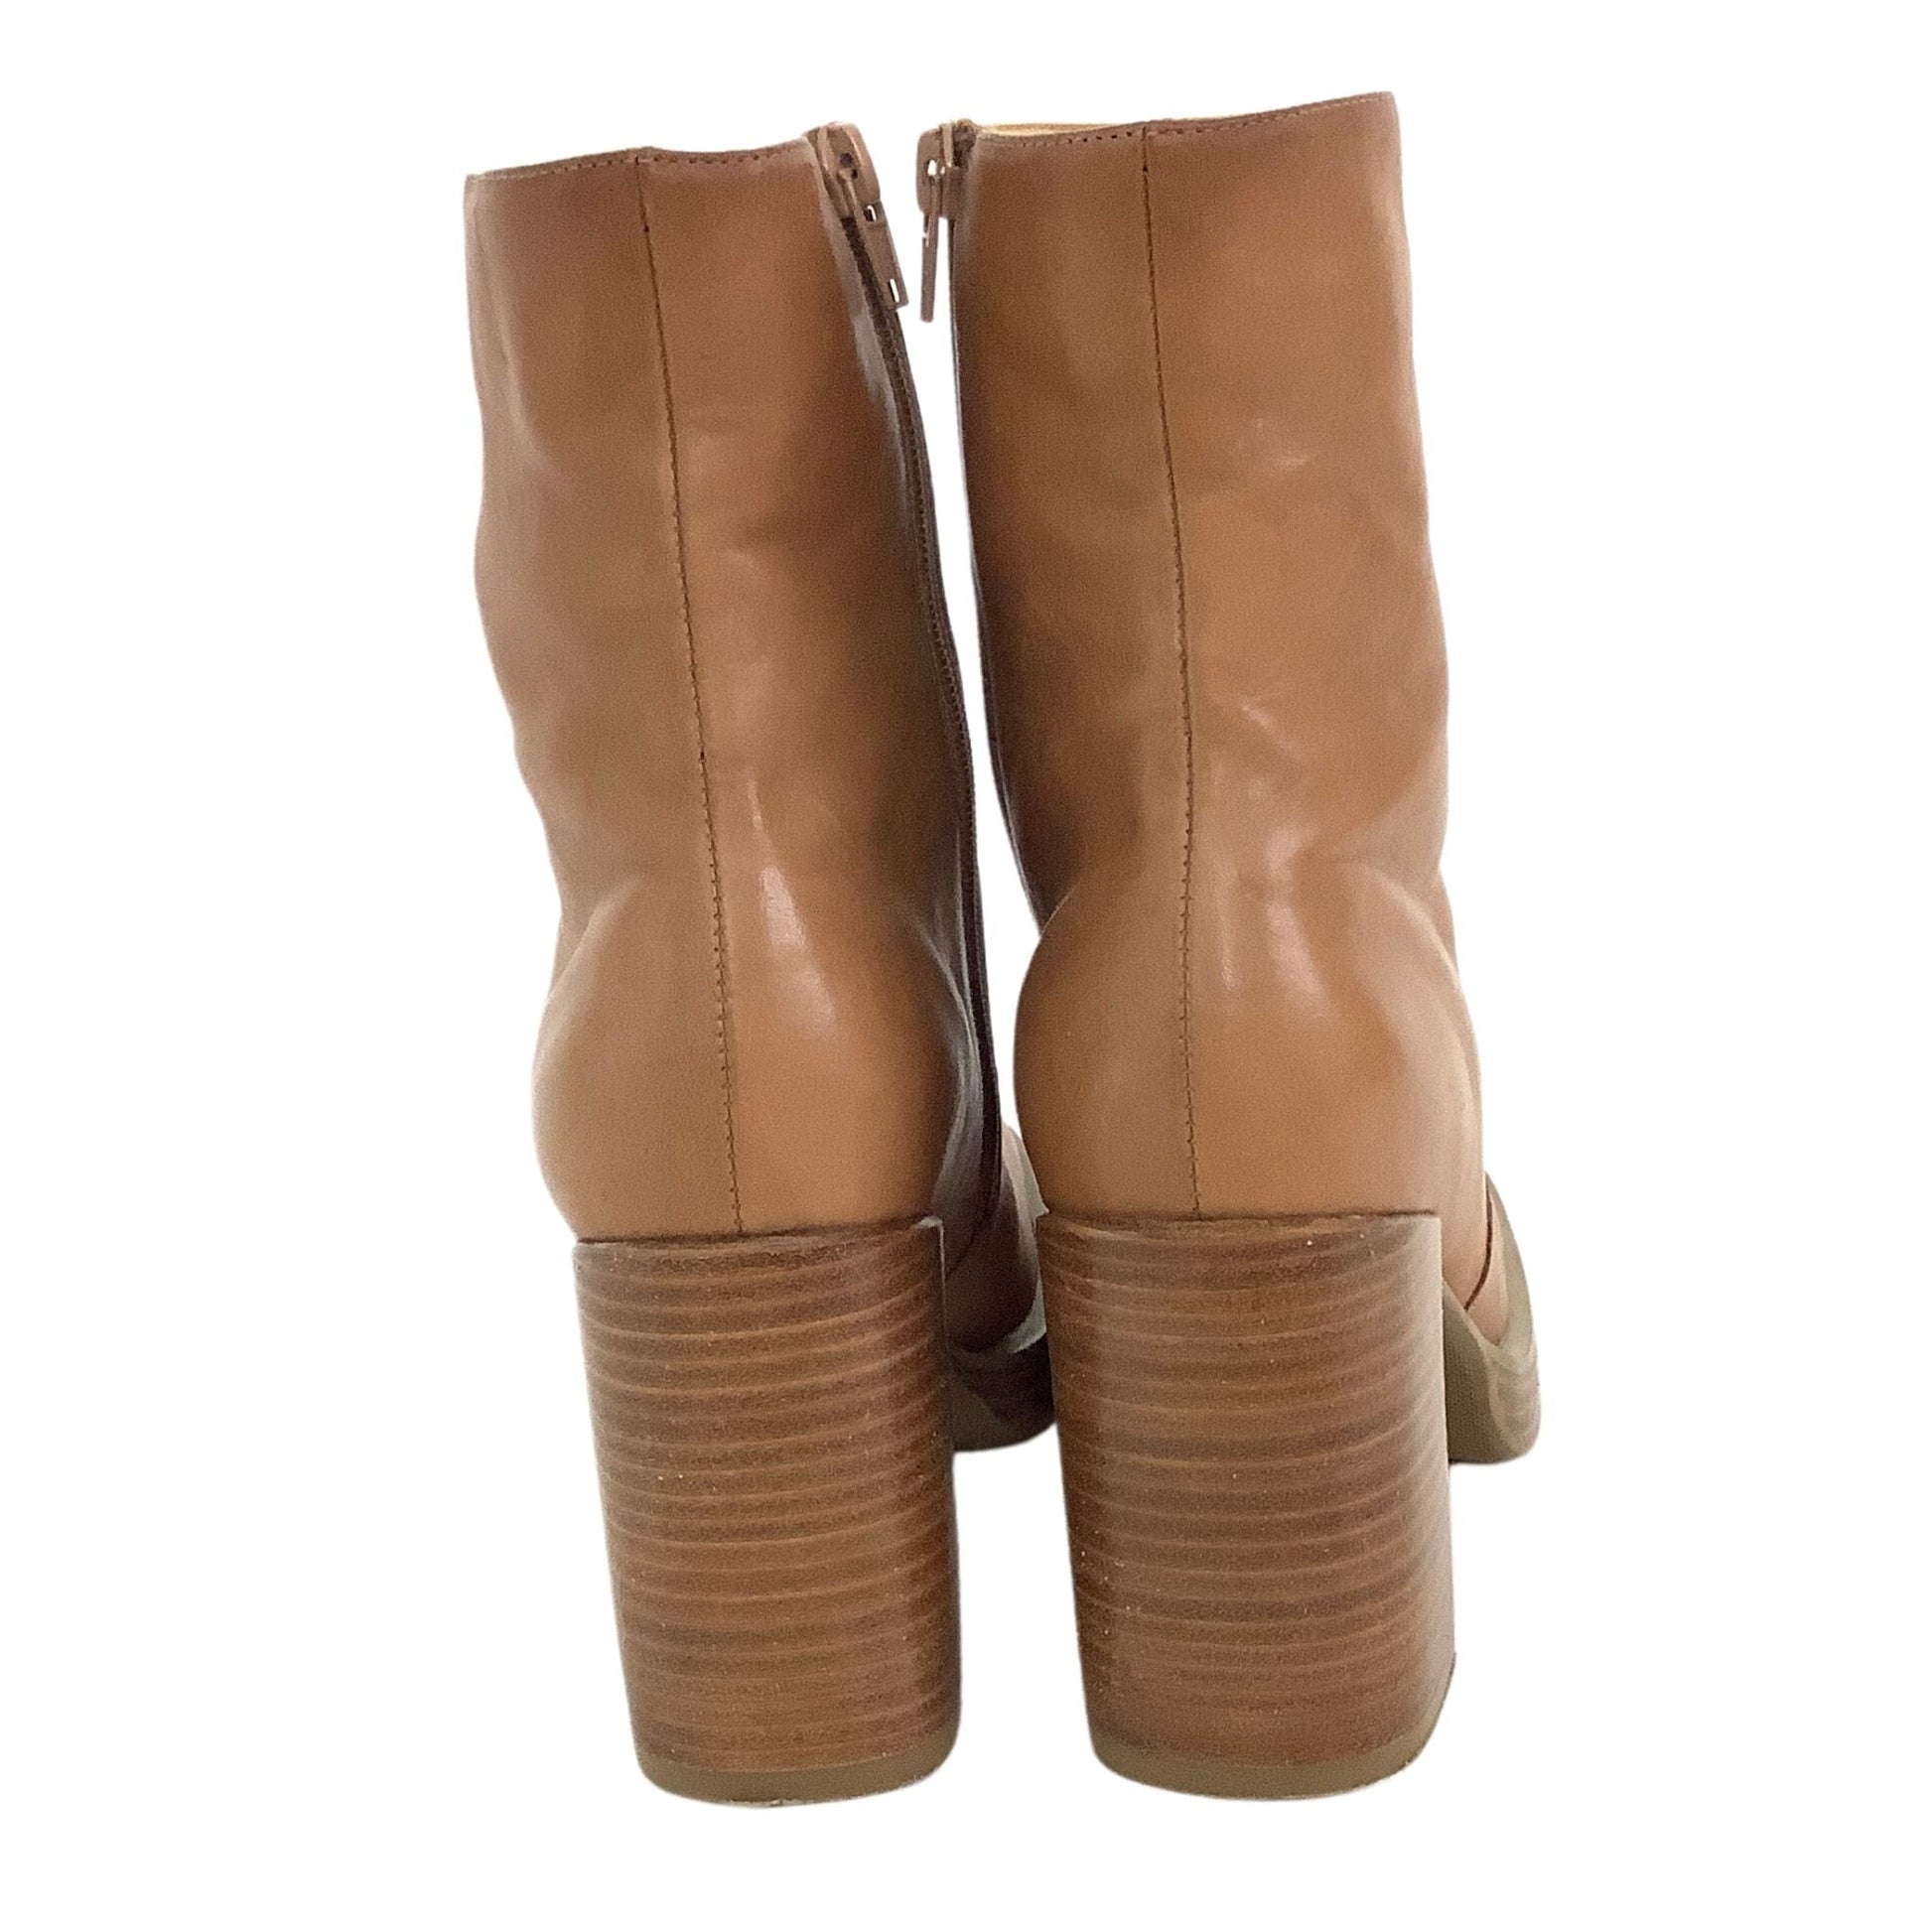 Y2K Chunky Ankle Boots 7 / Tan / Y2K - Now